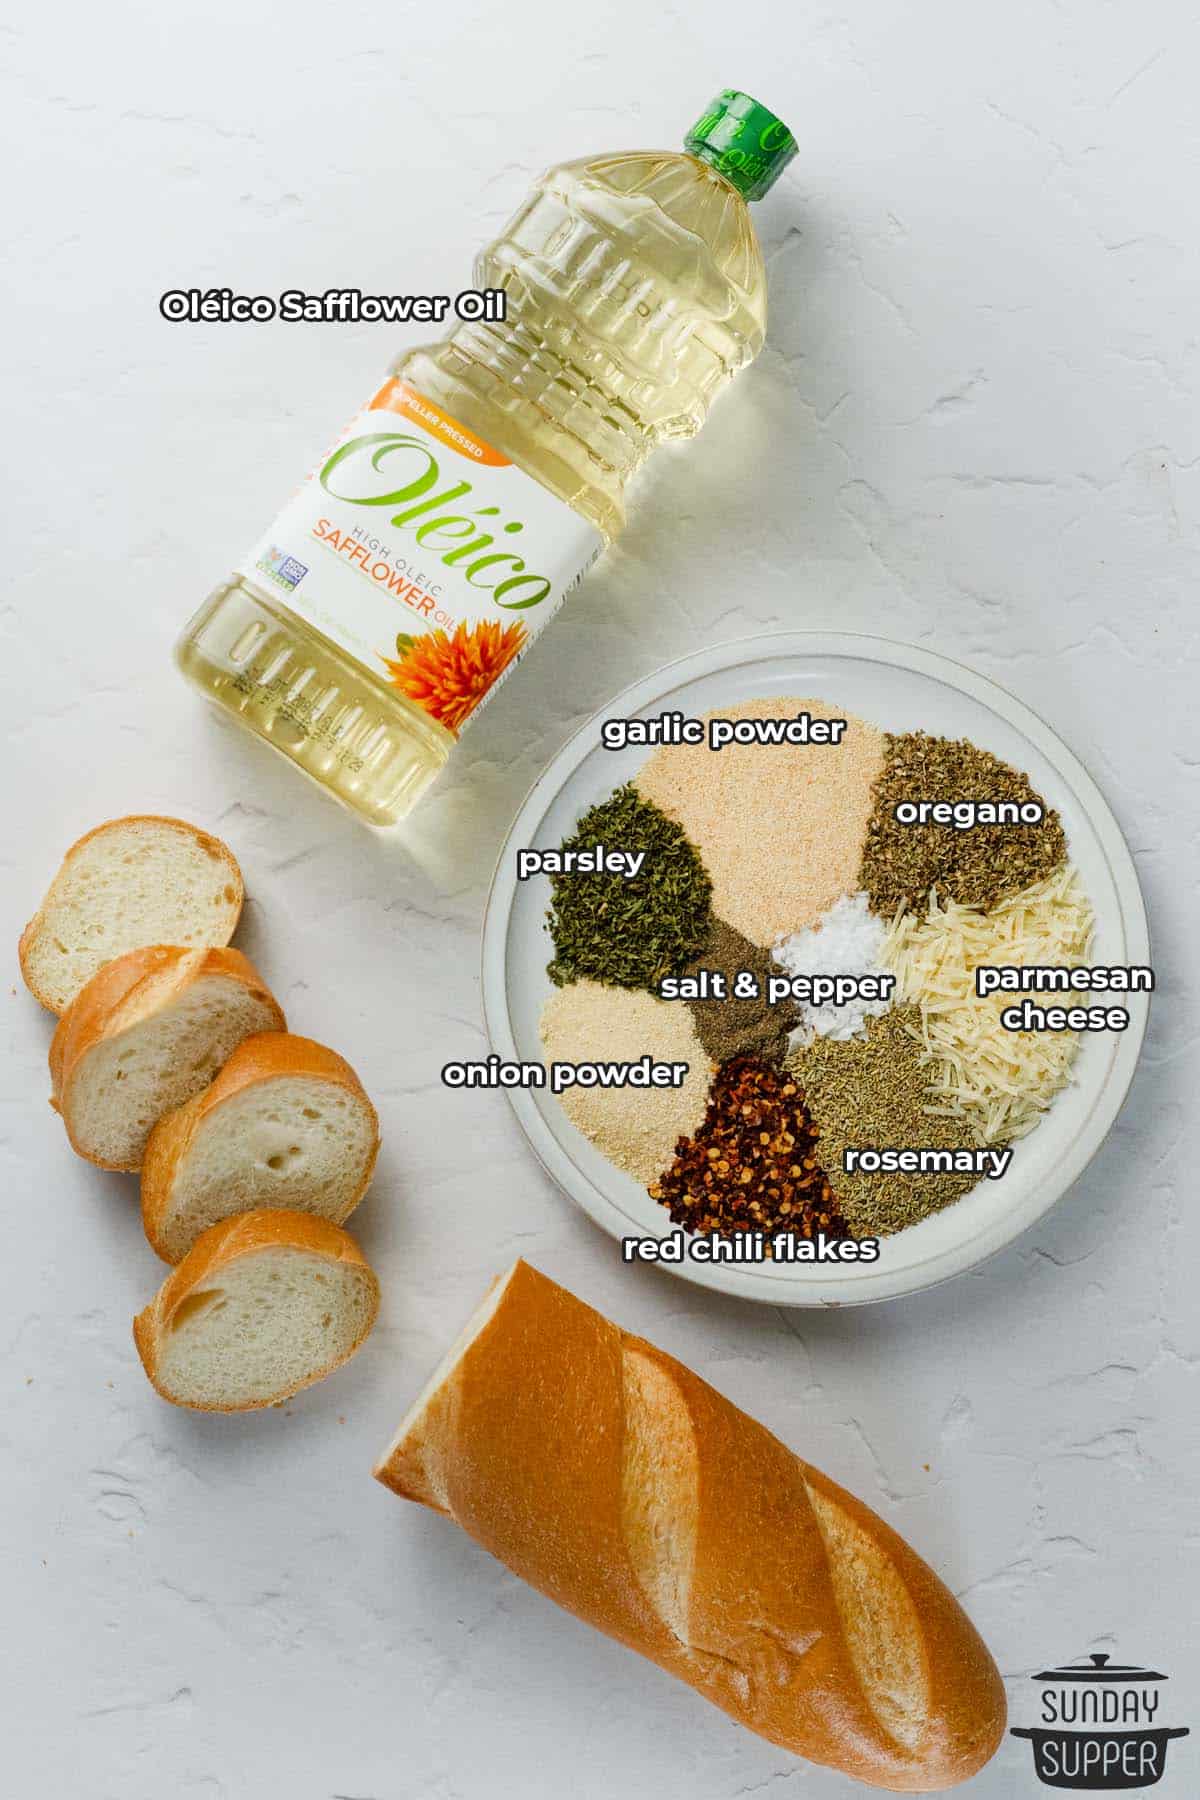 Ingredients to make oil dip with labels